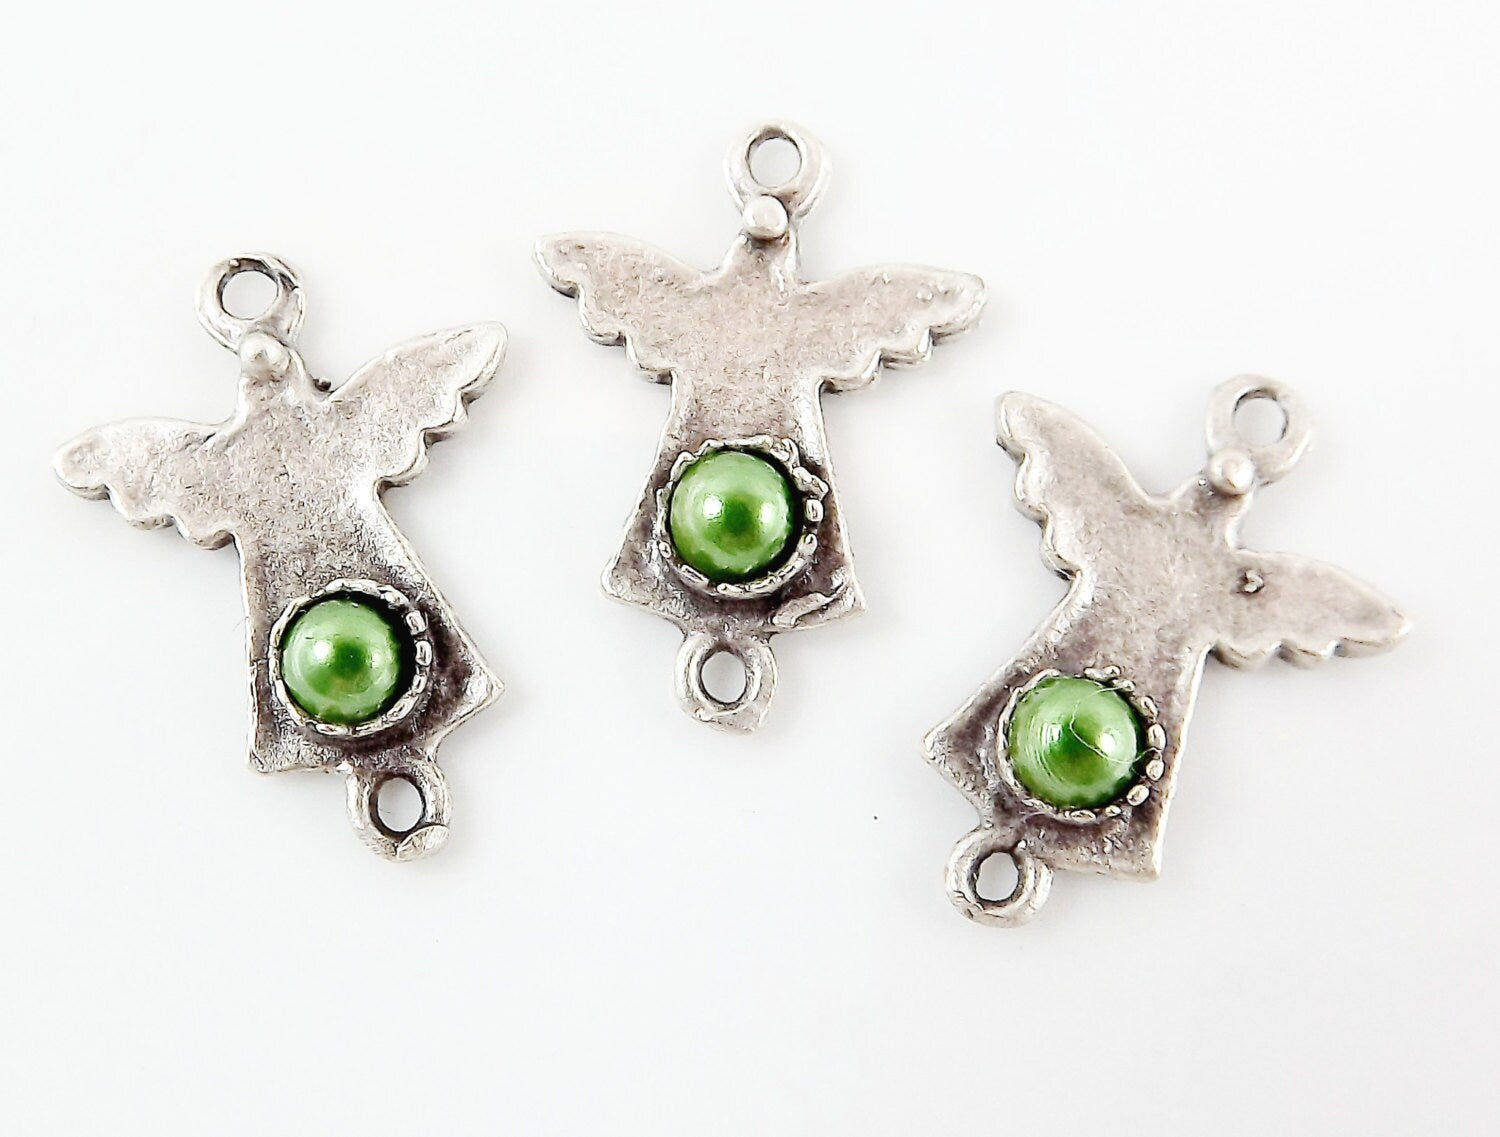 NEW - 3 Mini Angel Charm Connectors With Green Bead - Matte Silver Plated